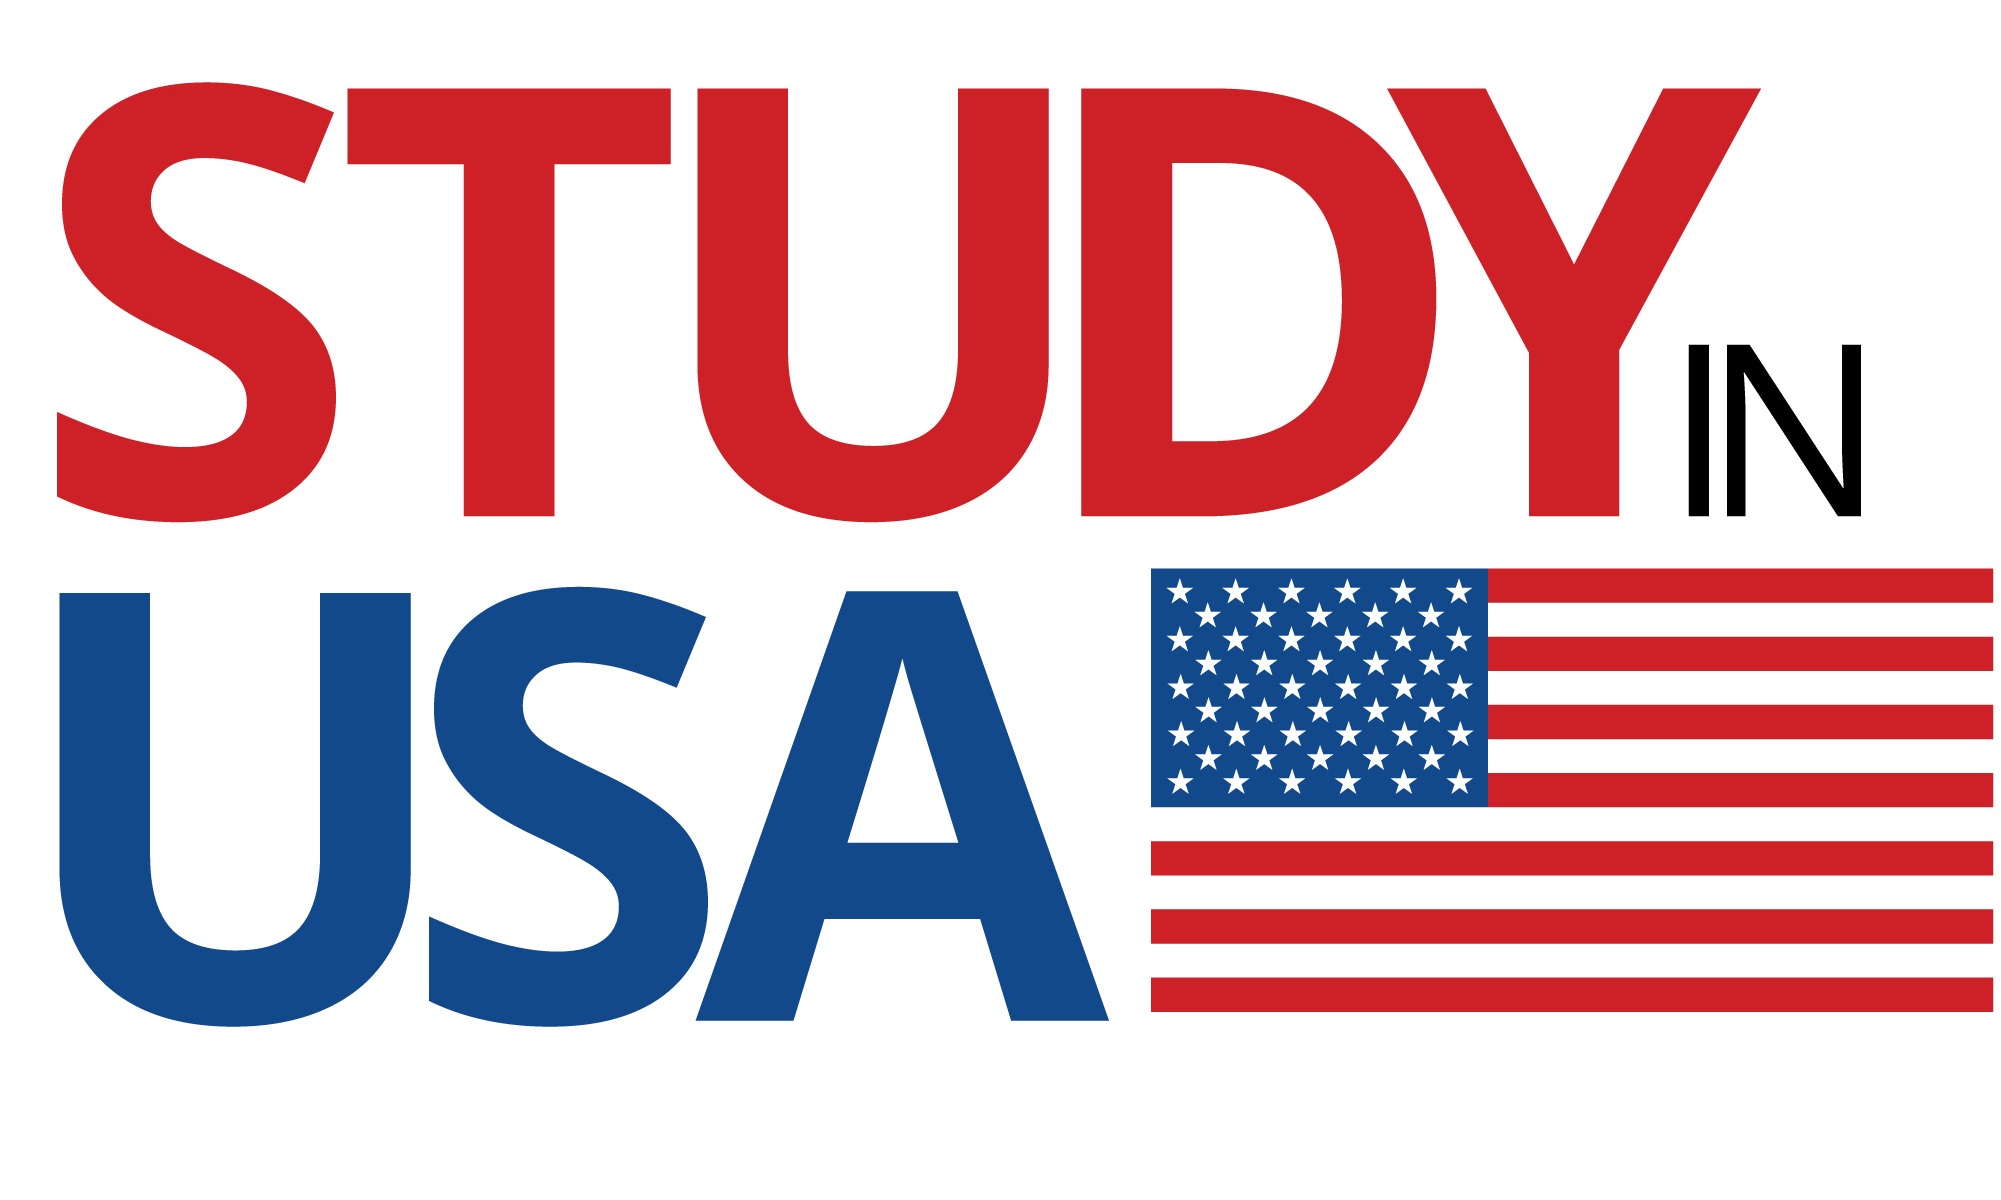 Study dream in the US